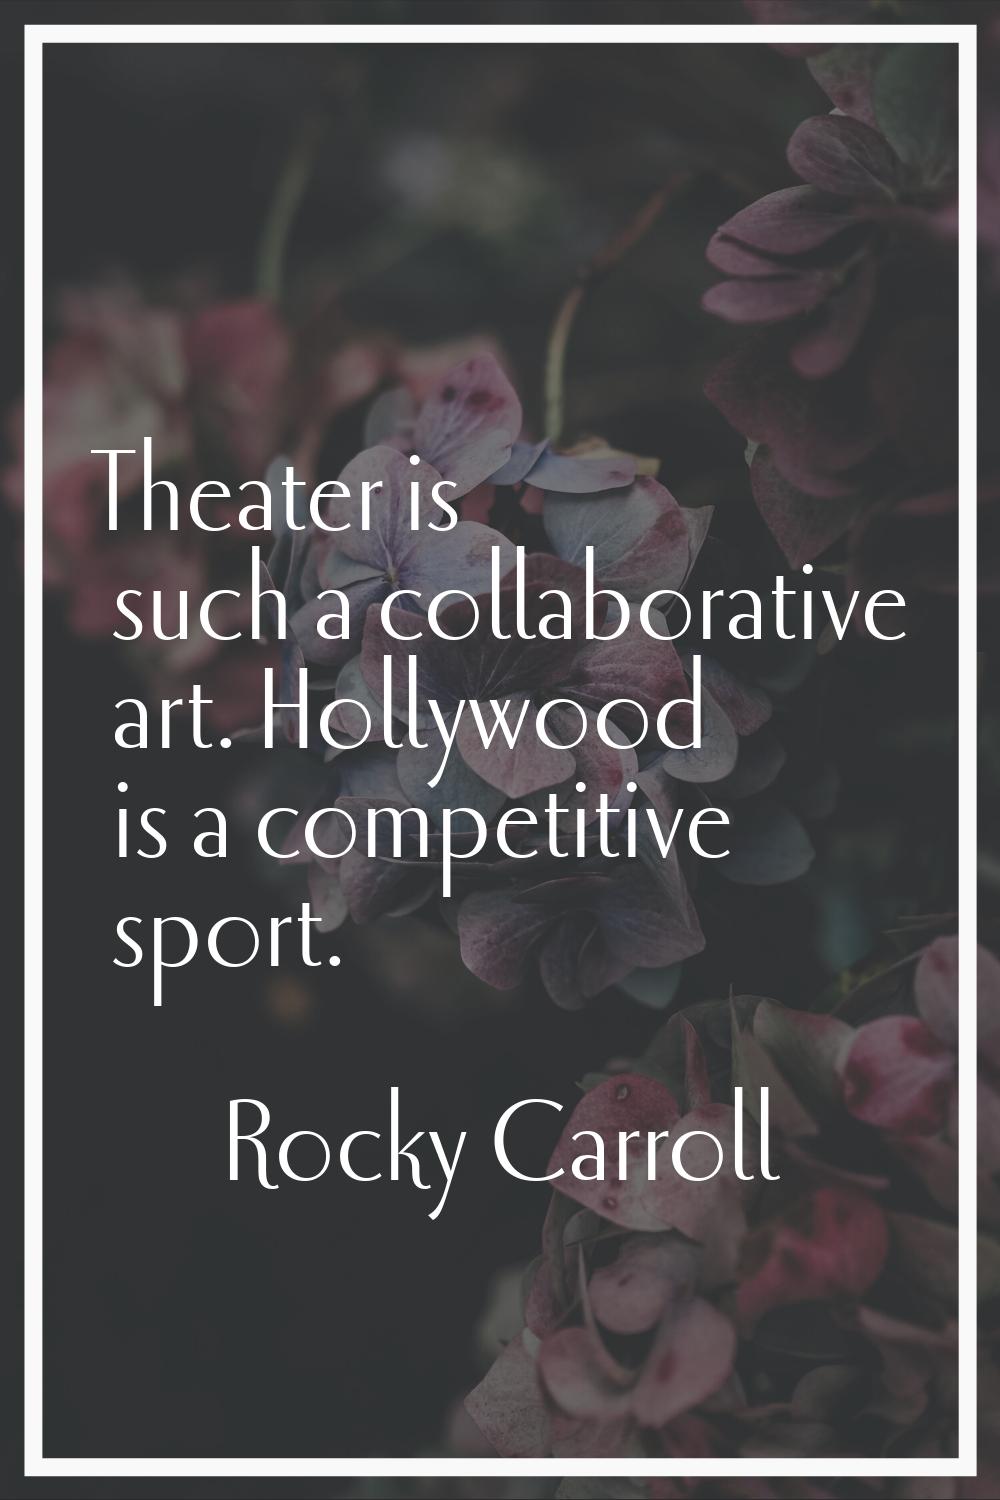 Theater is such a collaborative art. Hollywood is a competitive sport.